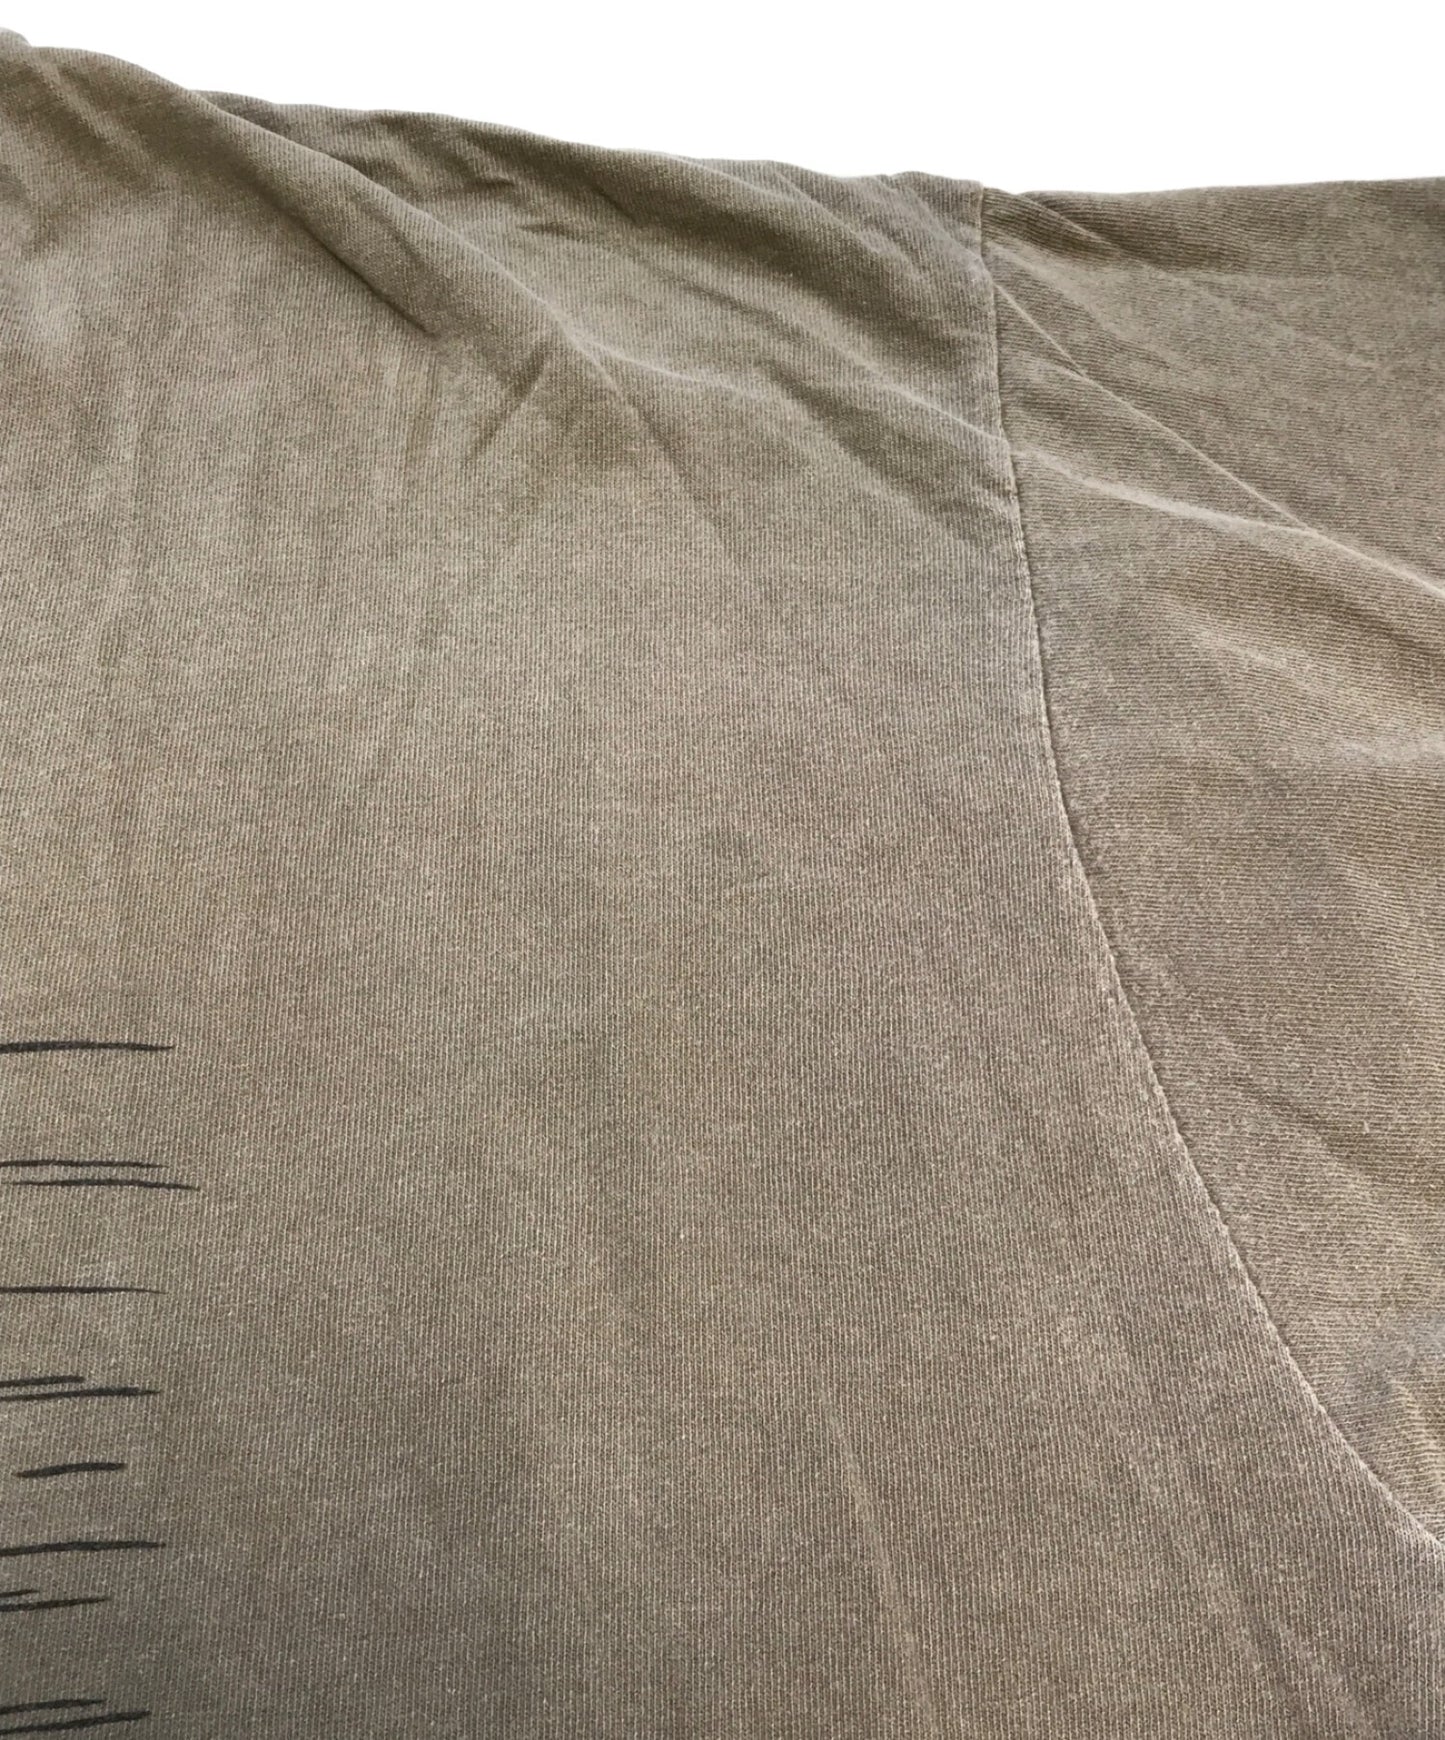 [Pre-owned] PEARL JAM Band T-Shirt